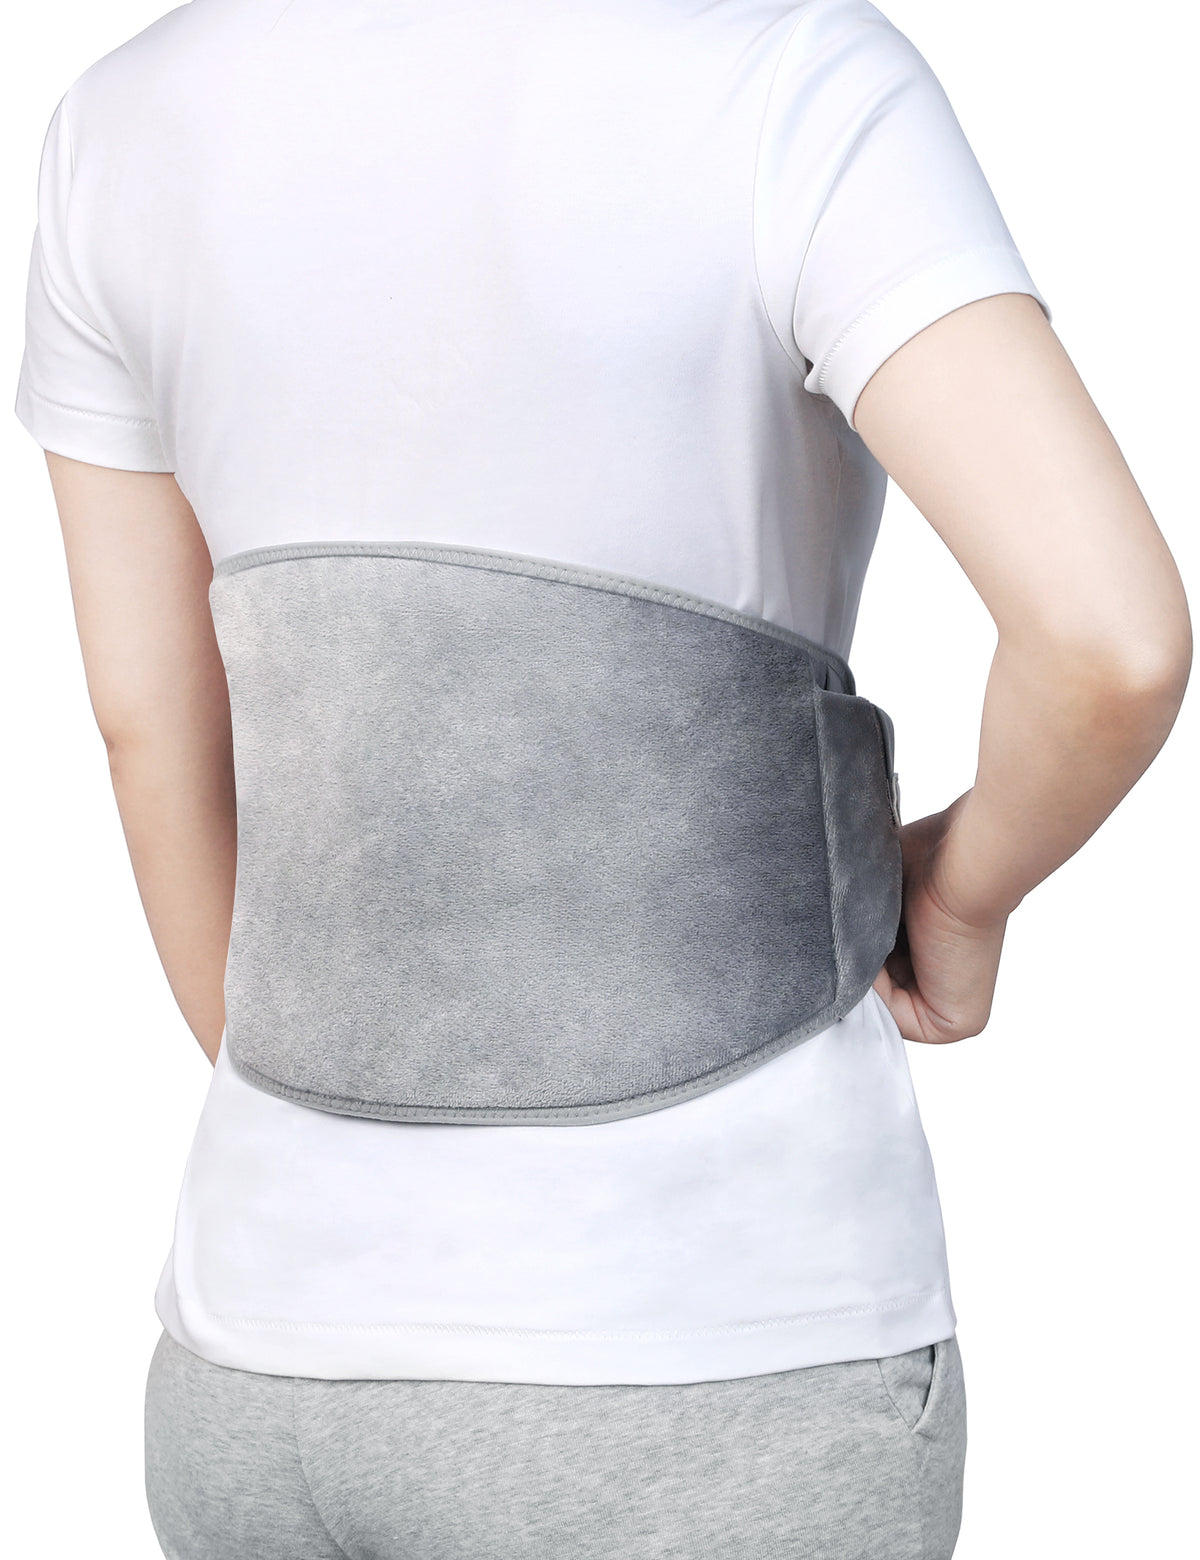 Evajoy Electric Heating Pad, Graphene Heating Belt, Pain Relief for Back, Waist, Shoulder, Thigh